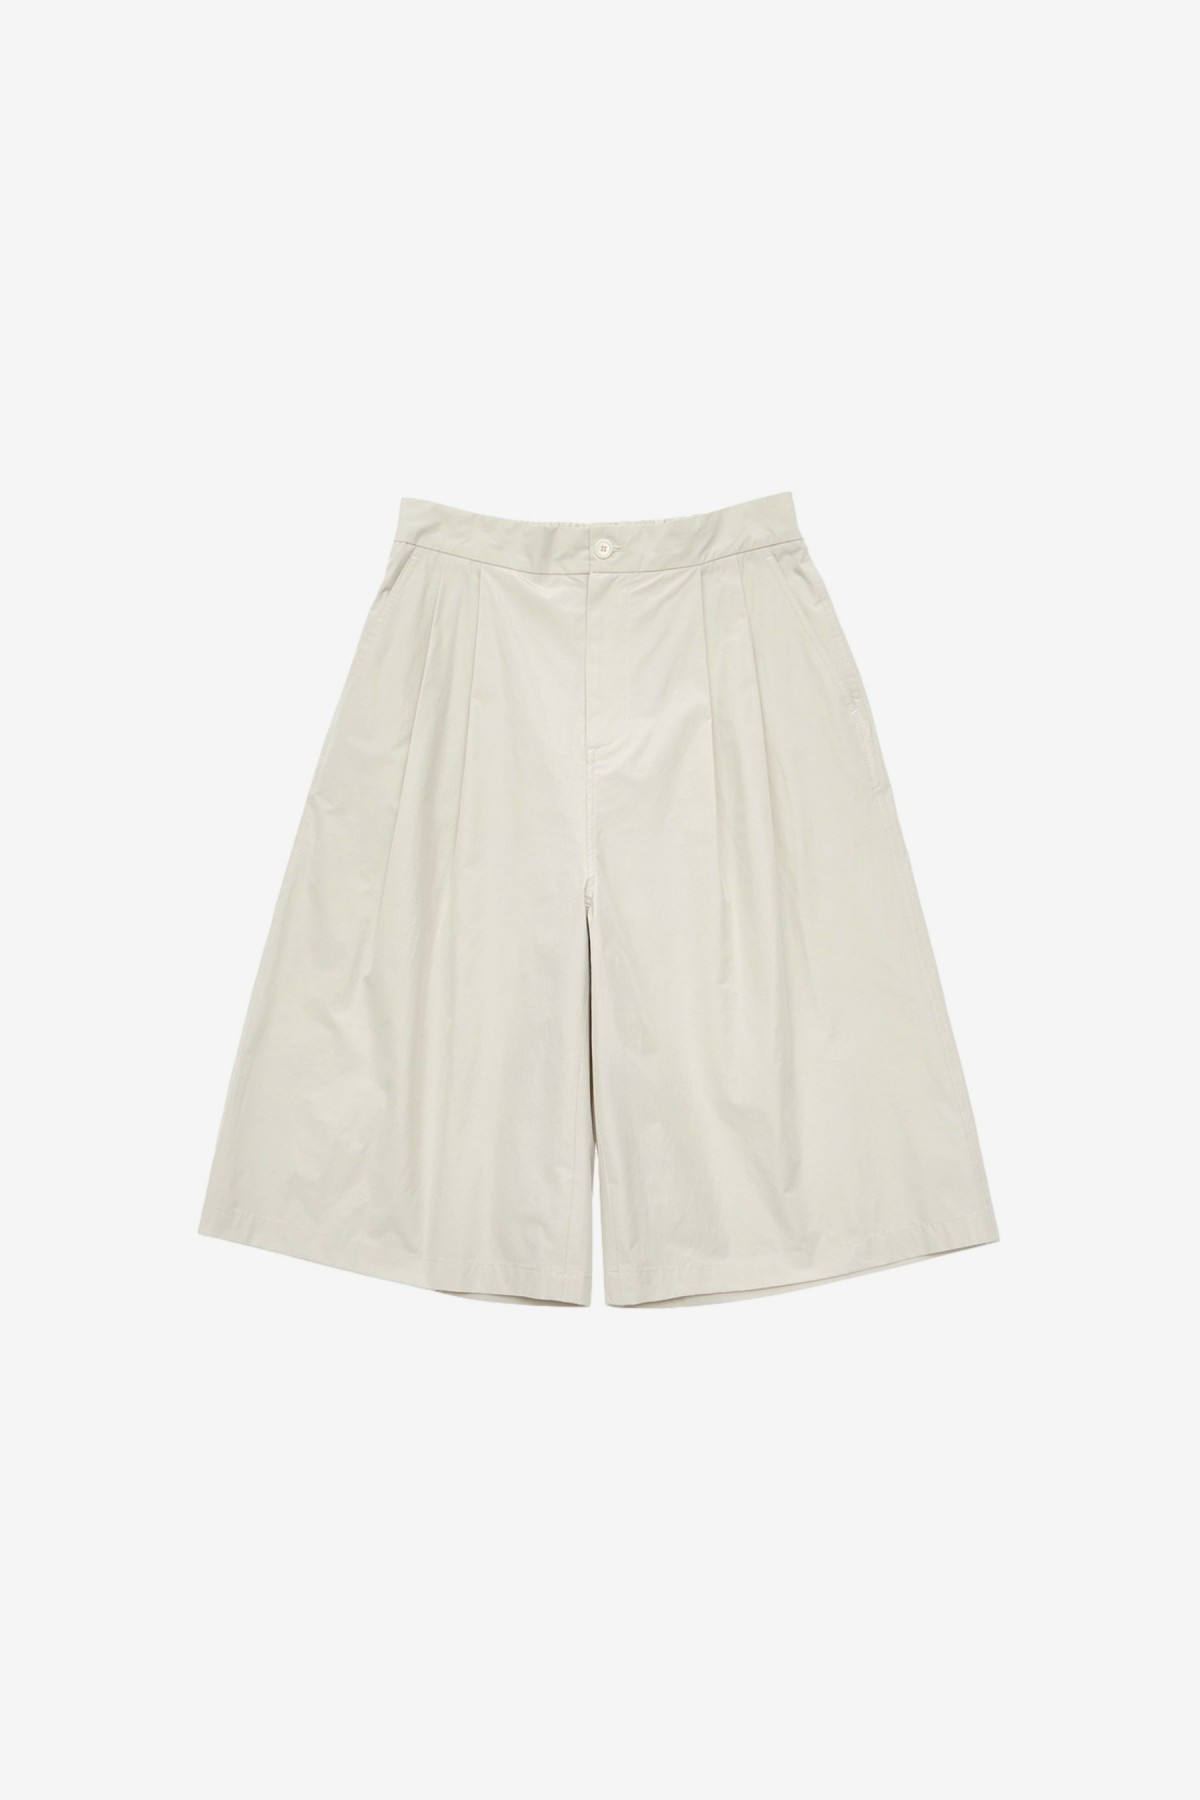 Amomento Two Tuck Wide Shorts in Beige